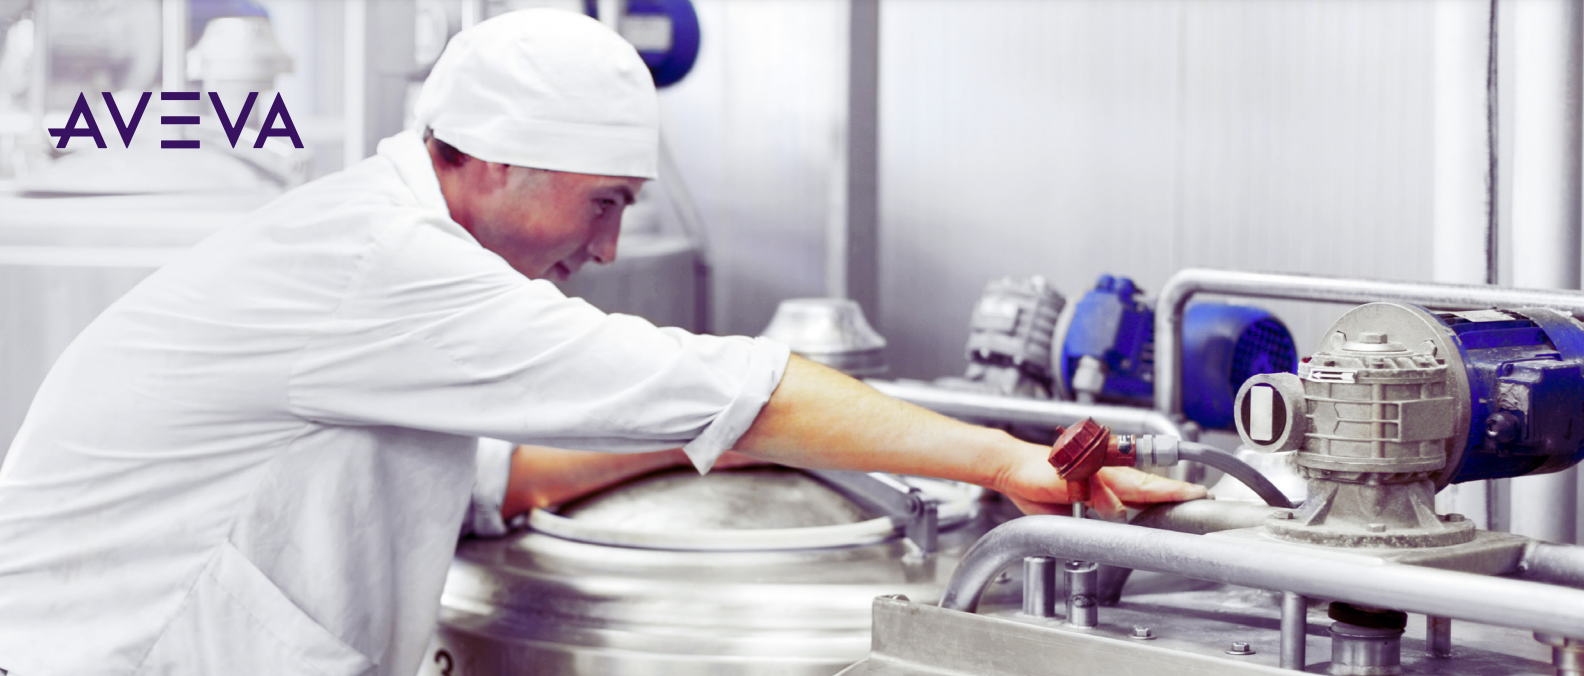 Successful manufacturing operations at F&N Dairies rely on AVEVA solutions